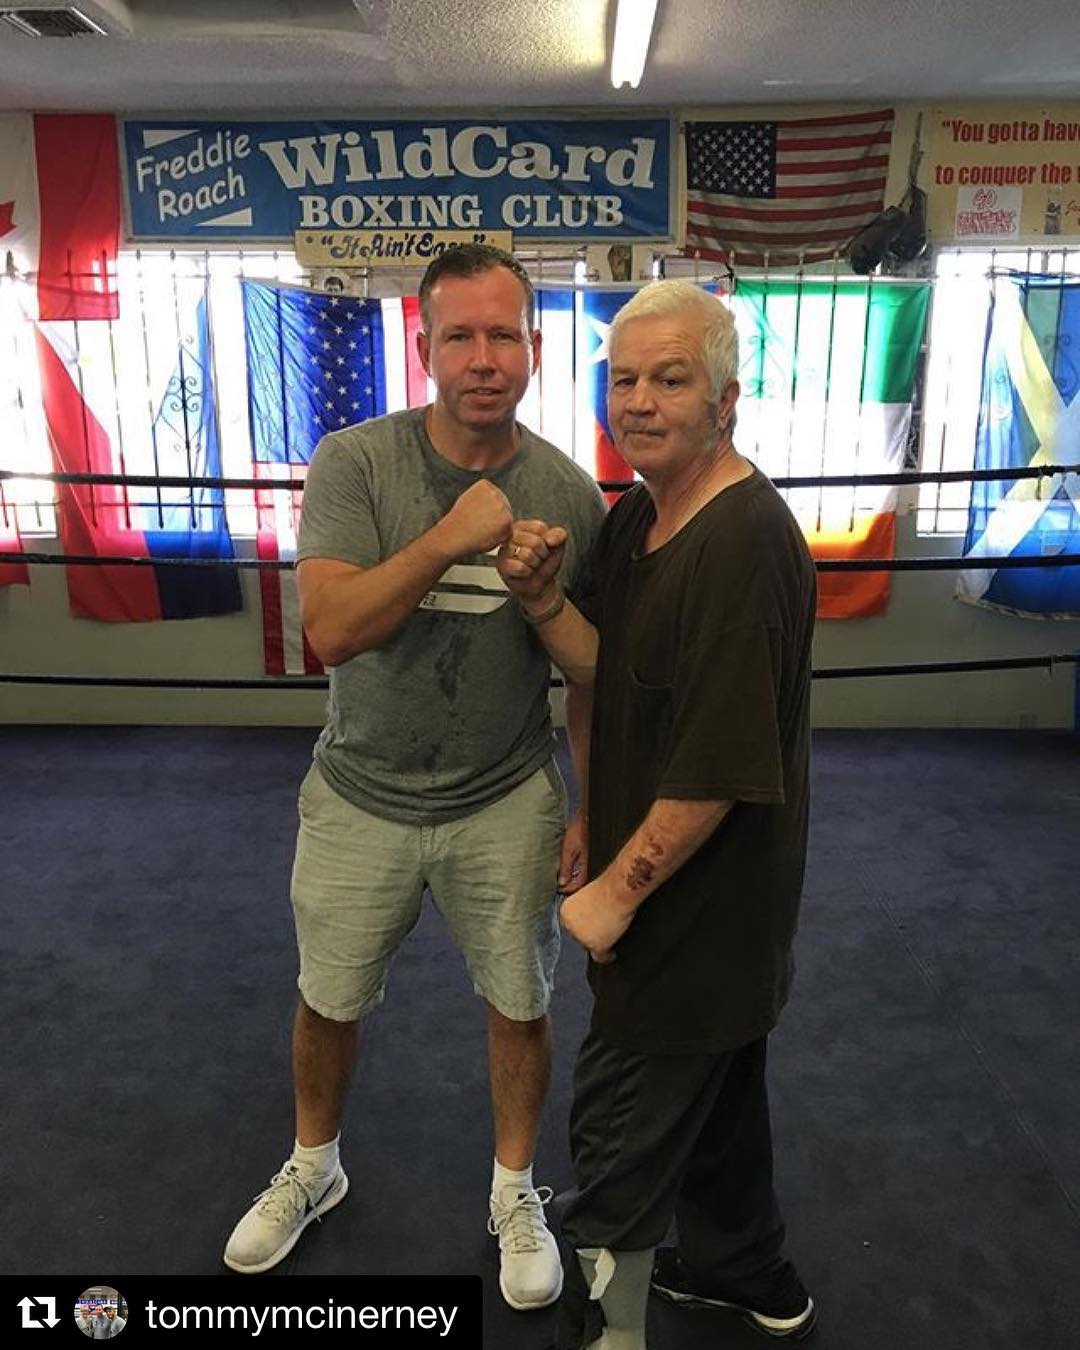 @tommymcinerney . .
Great time getting some in with one of Dedham's well-known boxer's  Pepper Roach at @wildcardboxingclub @freddieroach